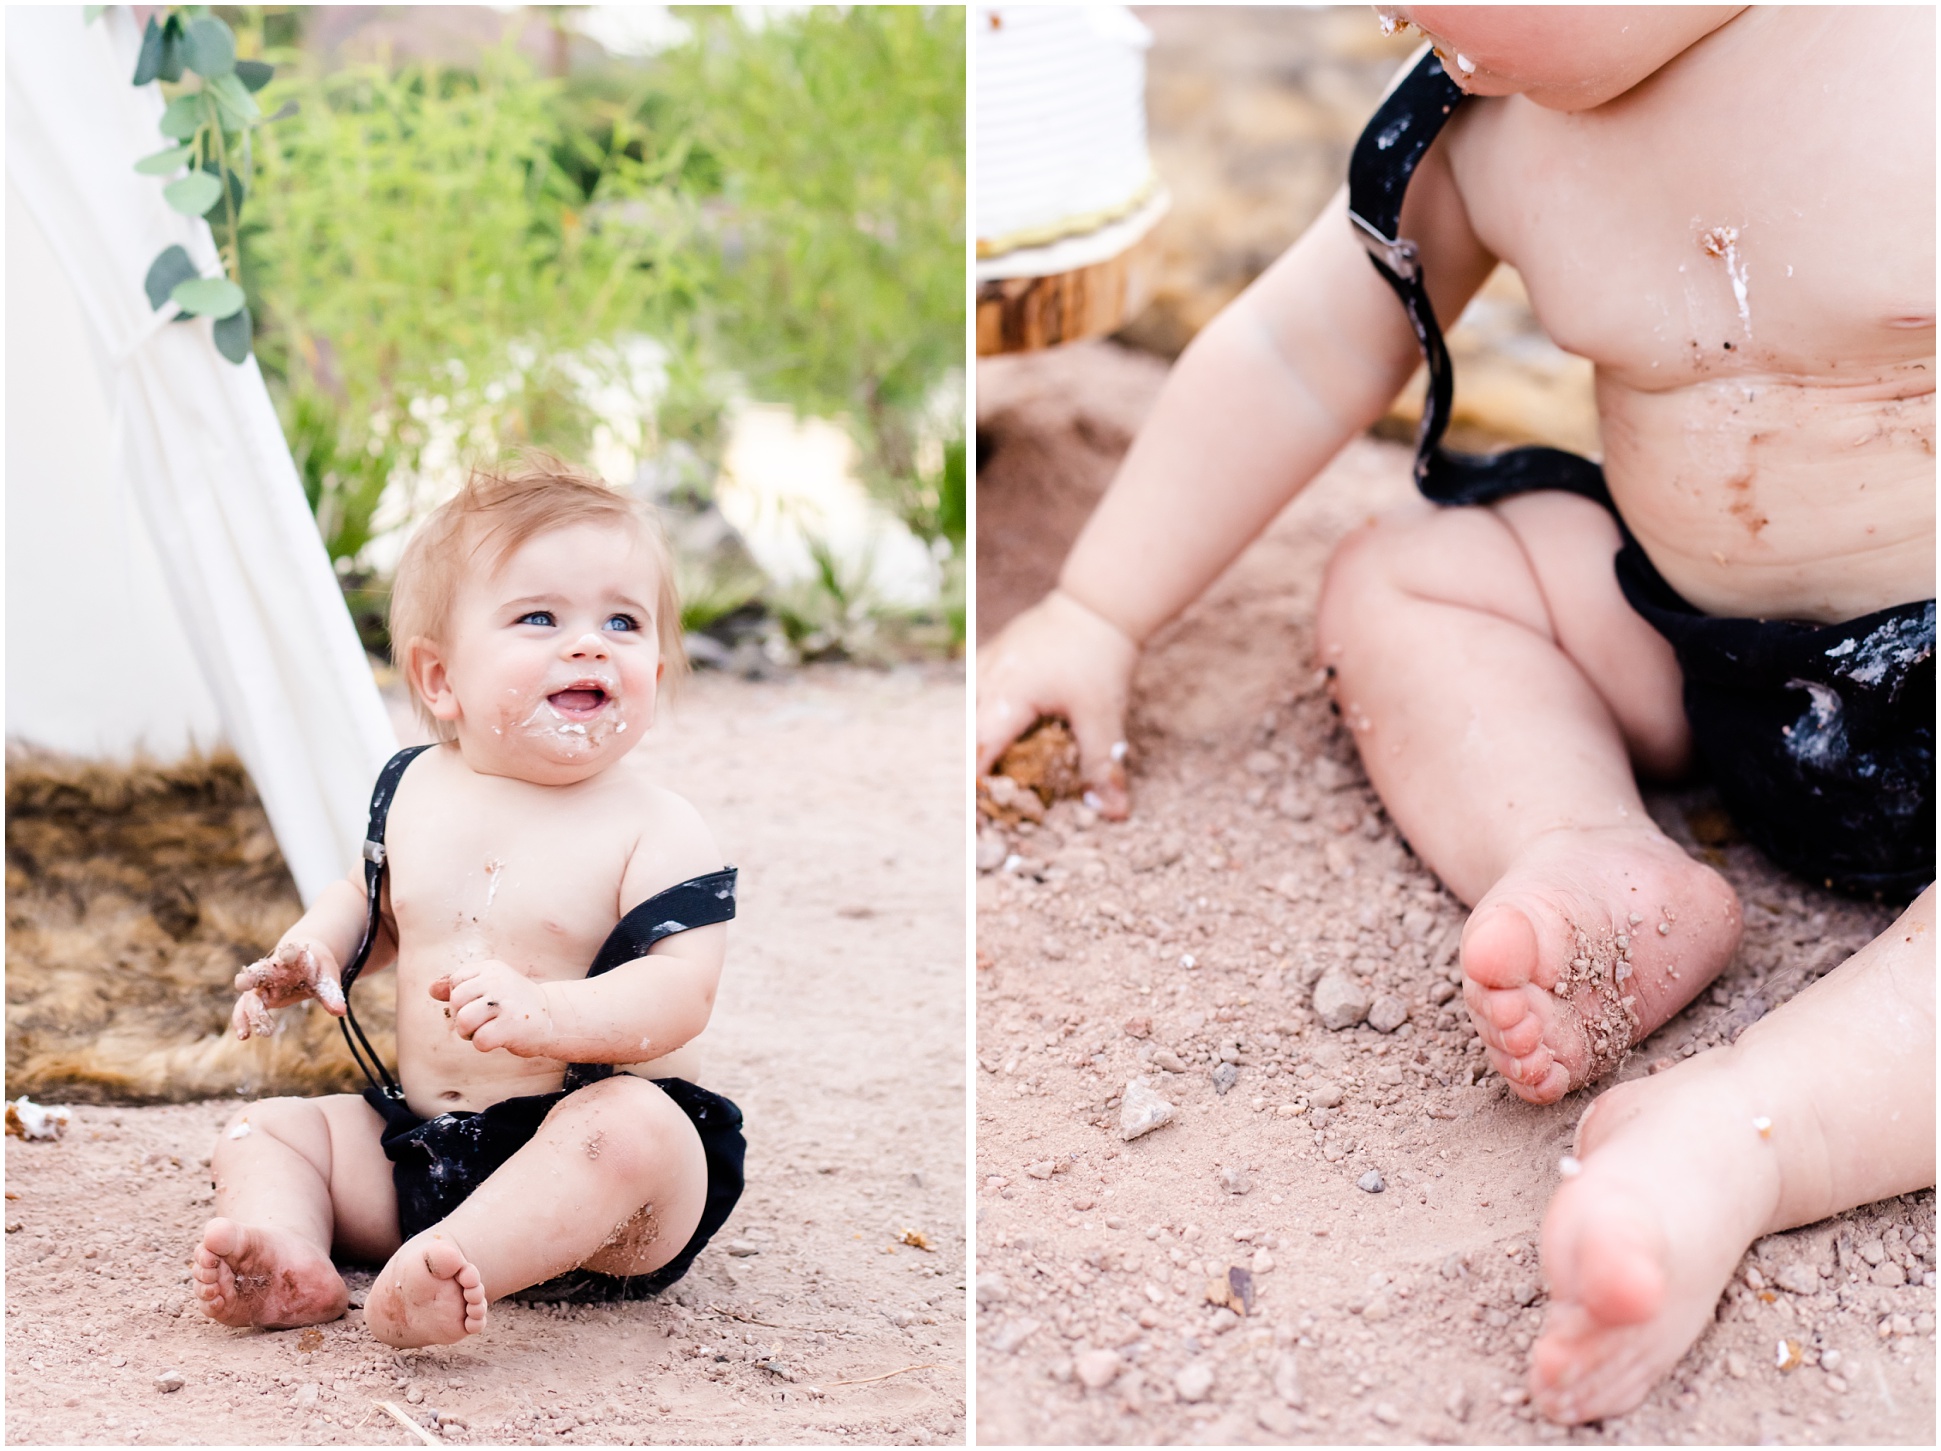 Left: Karsyn eating cake with suspenders one, Right: Karsyn playing in the dirt with his feet in focus